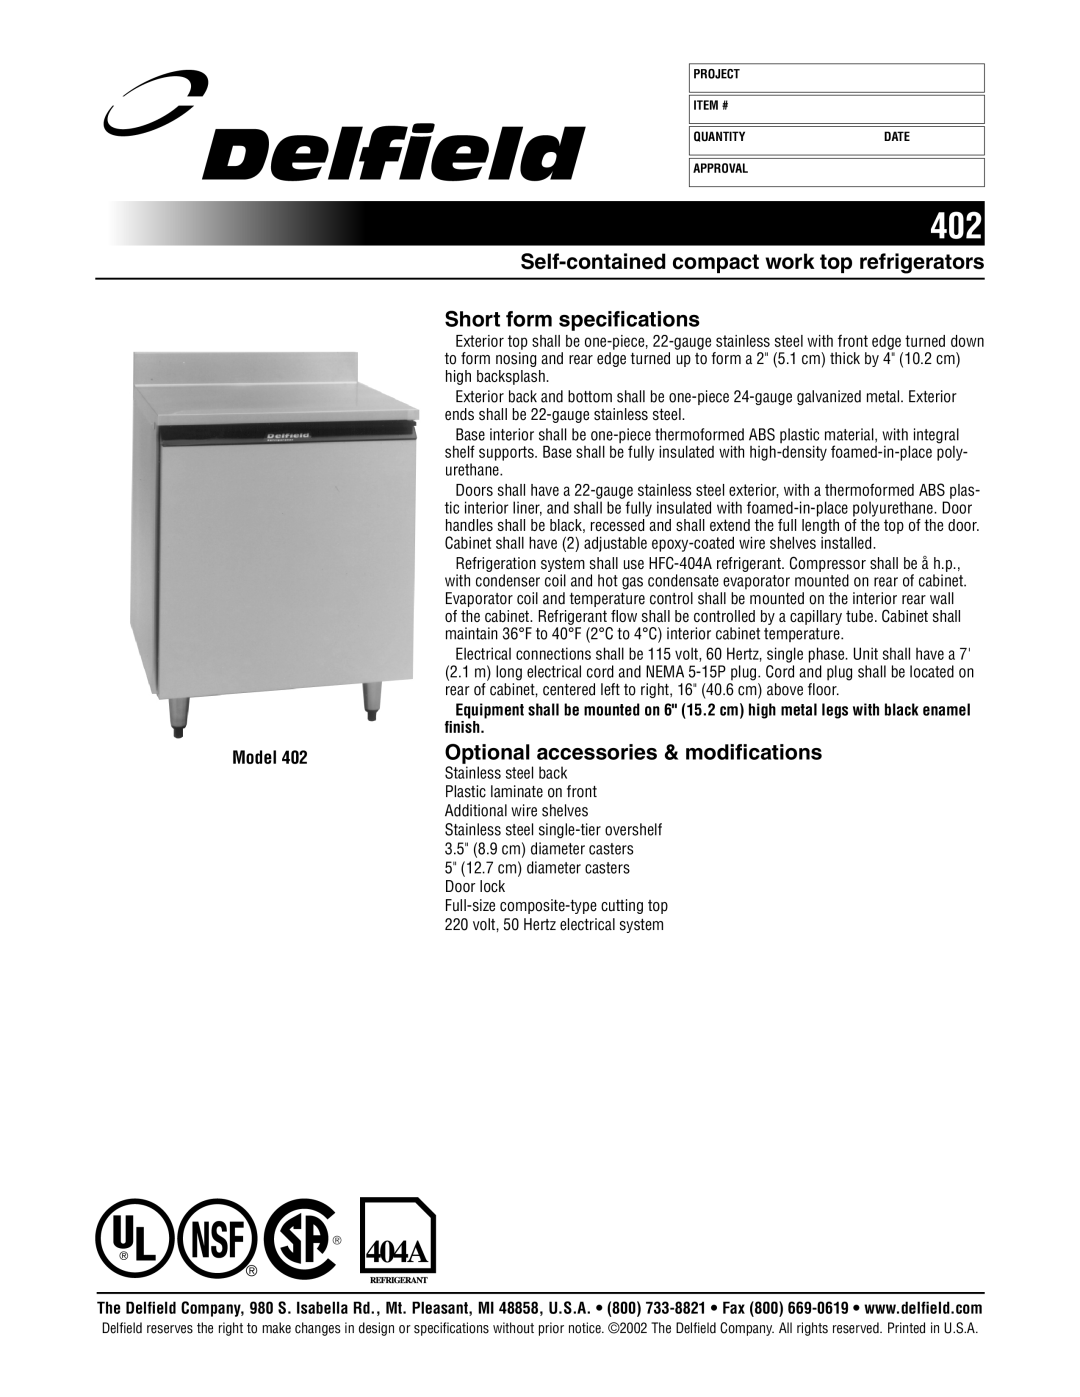 Delfield 402 specifications Self-containedcompact work top refrigerators, Short form specifications, Model, finish 